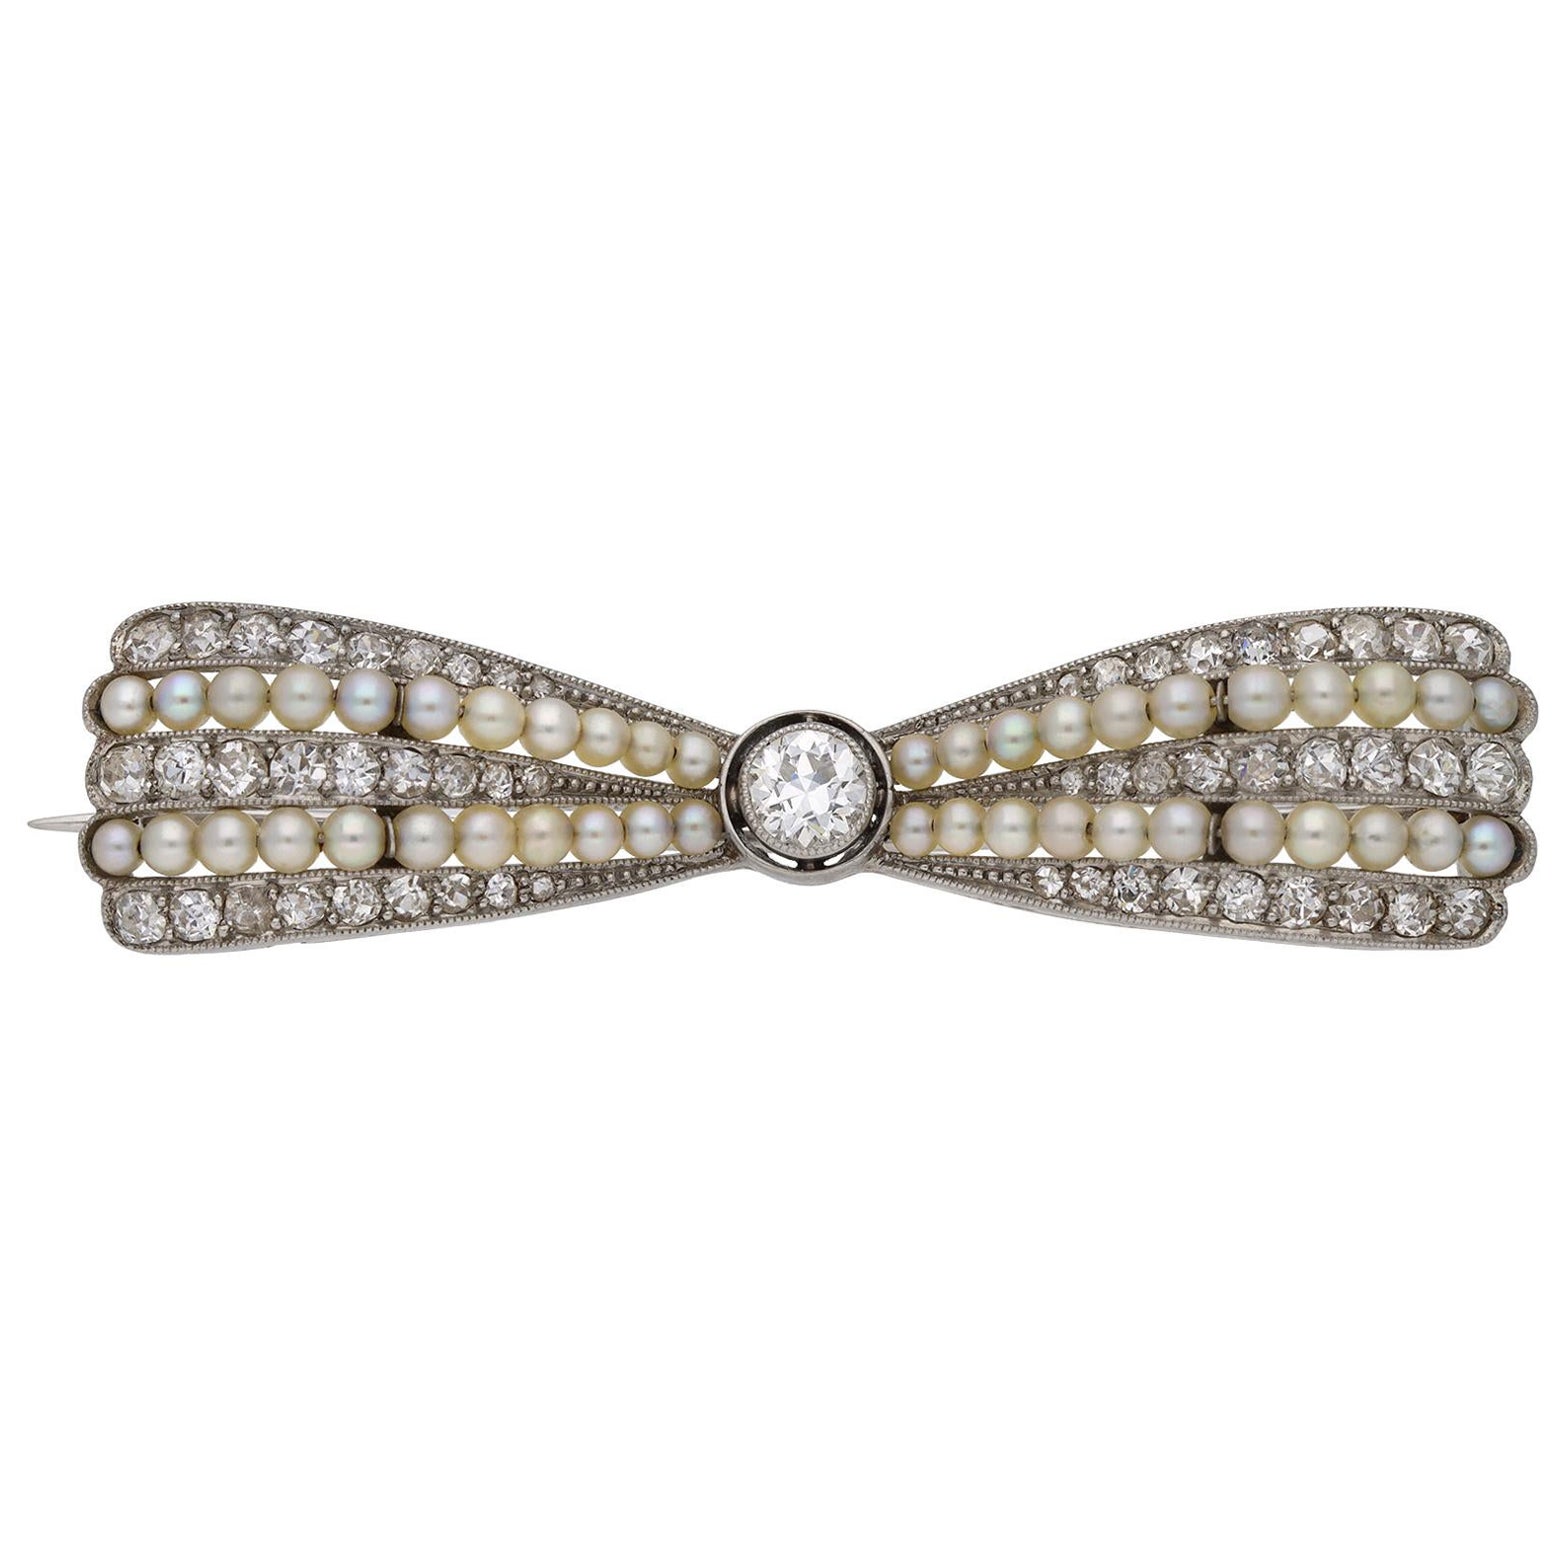 Antique pearl and diamond bow brooch, circa 1905.